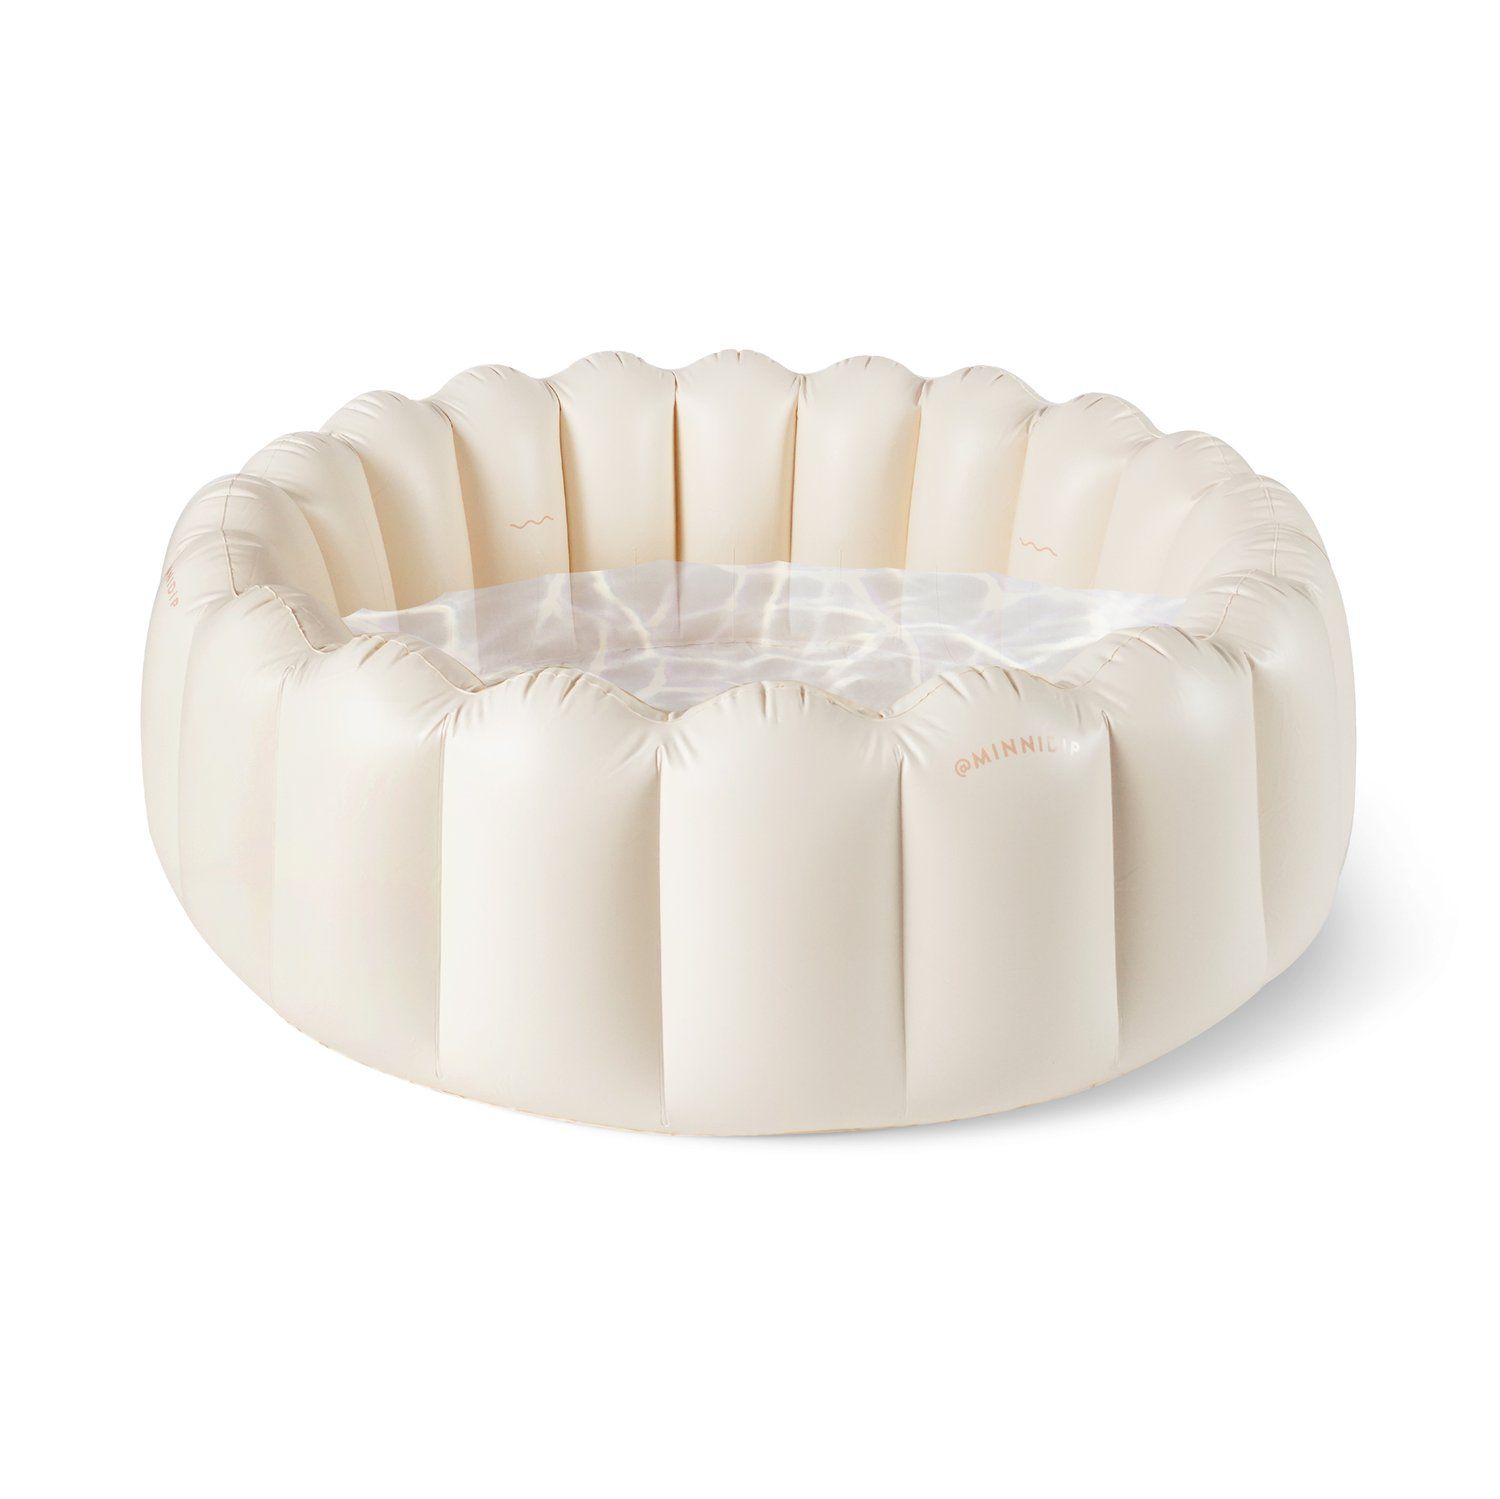 the CREAM TUFTED luxe inflatable pool — MINNIDIP LUXE INFLATABLE POOLS BY LA VACA | Minnidip